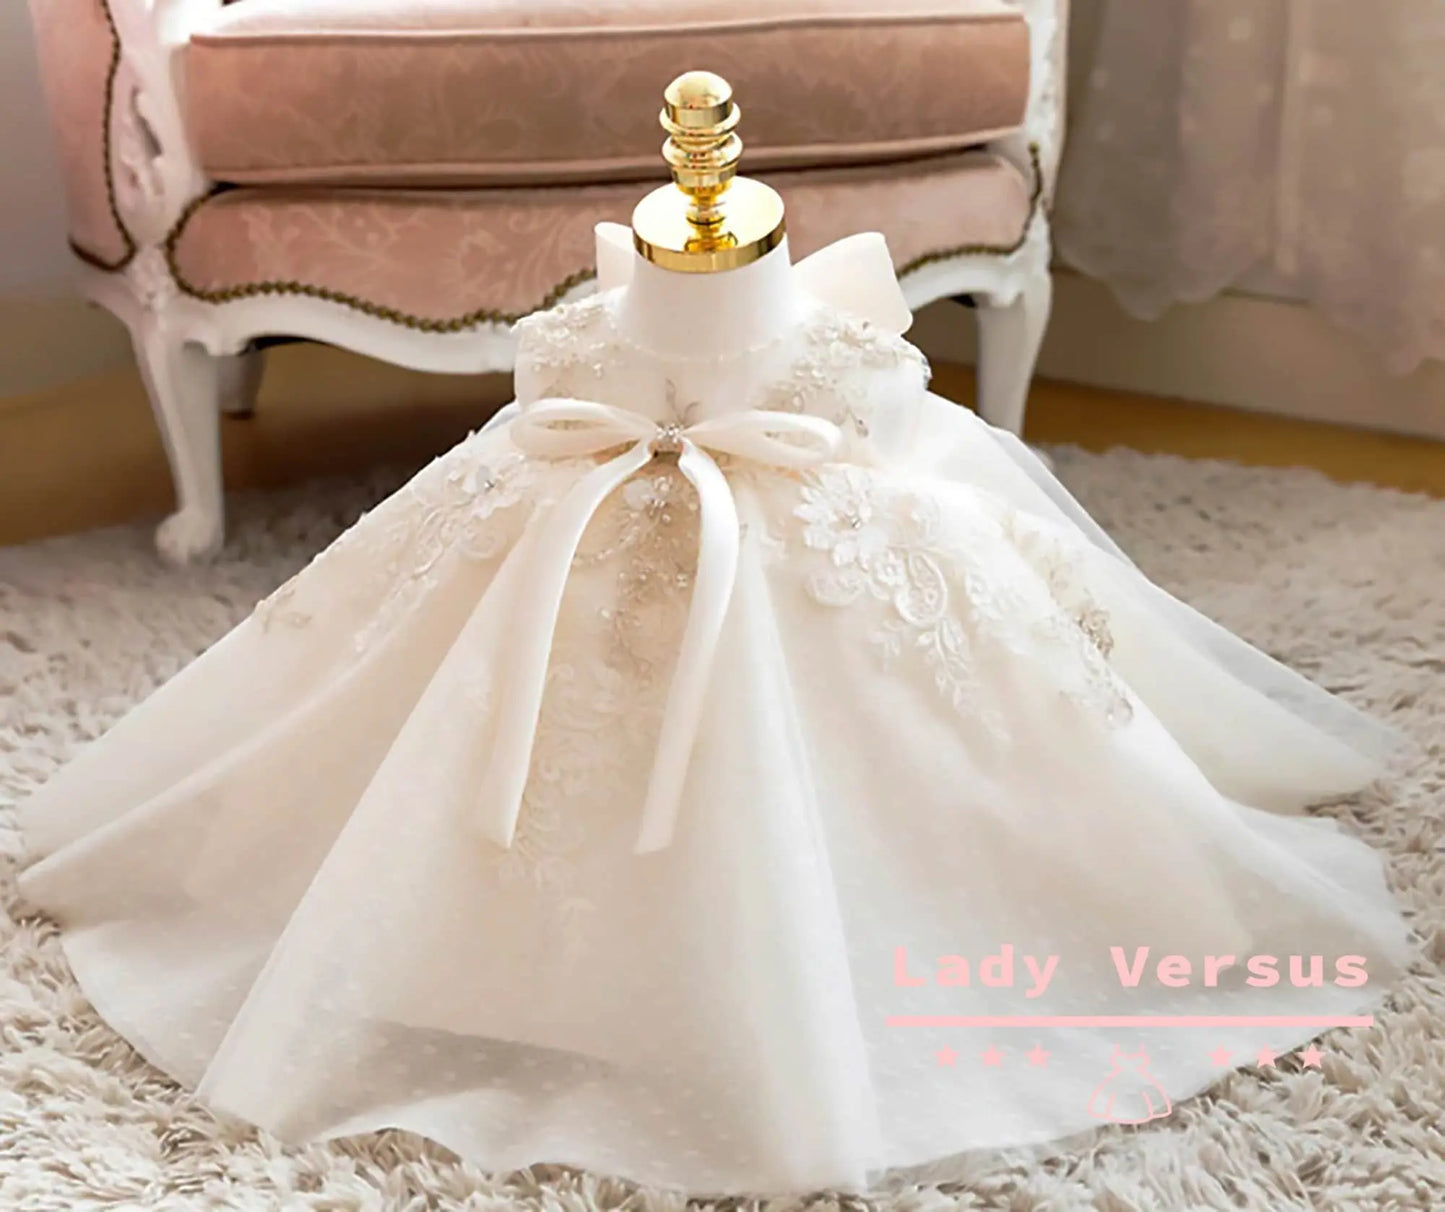 Baby Girl Baptism Dress  | Baby Girl Christening Gown | Baby Girl Baptism Outfit | girls  birthday princess gown / flower girl dress Lady Versus